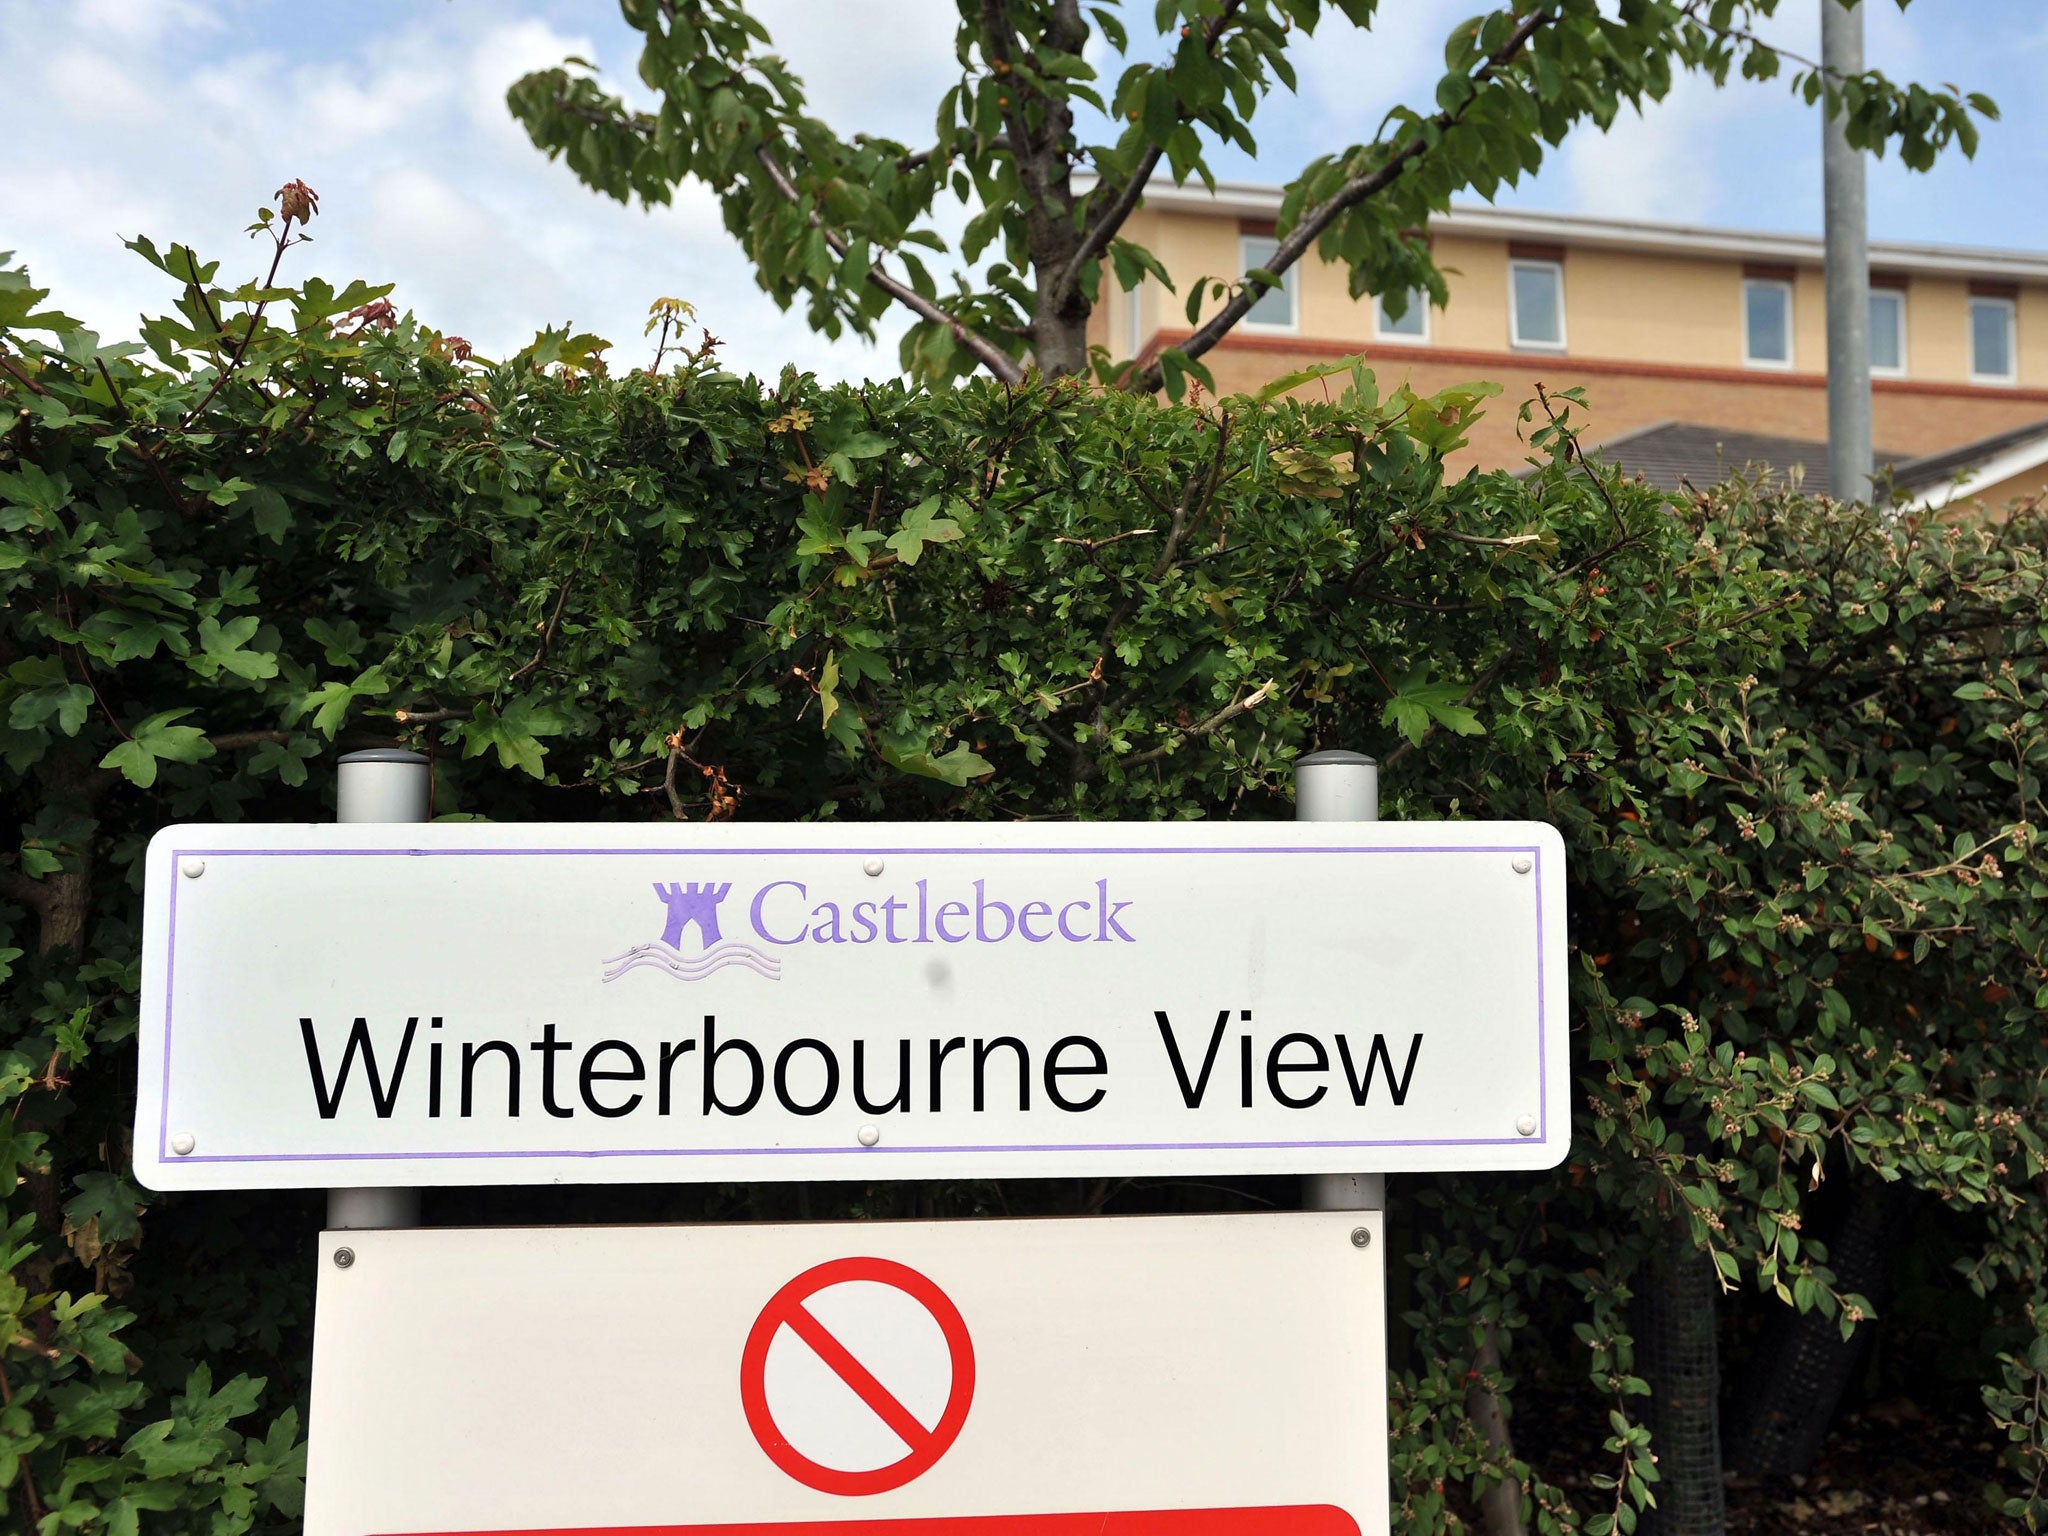 Over 3,000 people are still living as patients in hospitals, one year on from Government commitments to transform adult social care in the wake of the Winterbourne View abuse scandal